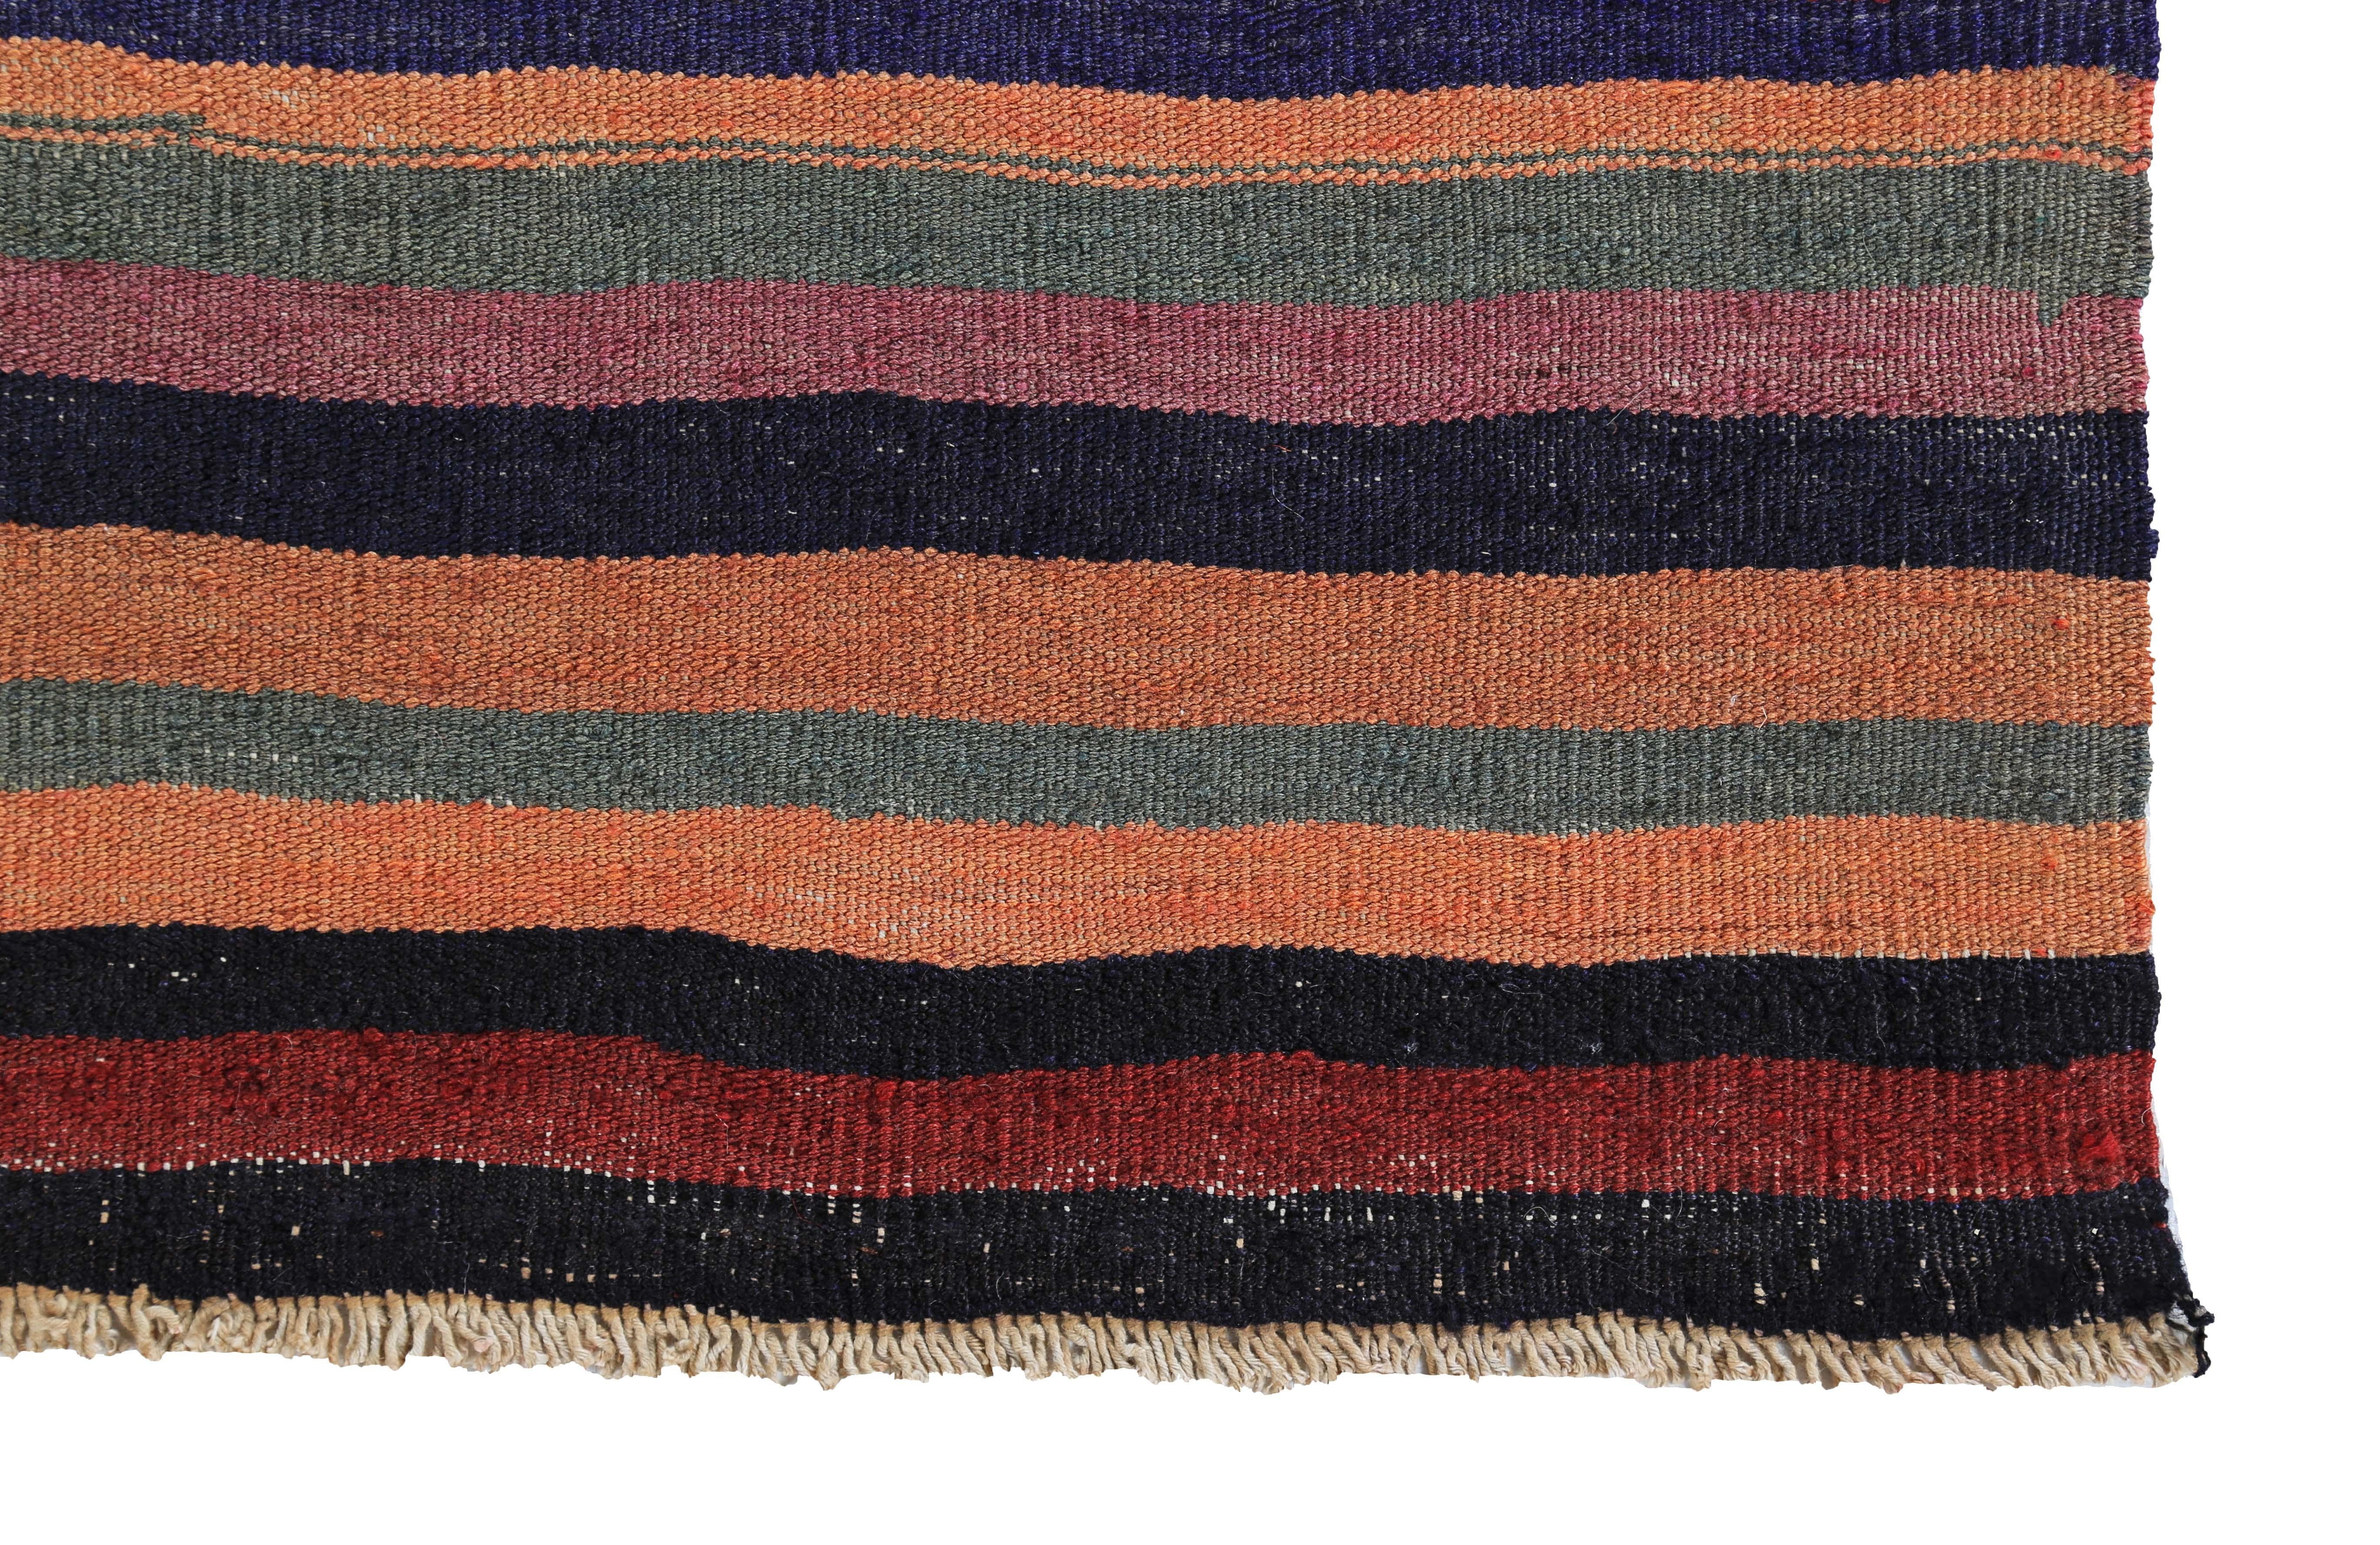 Hand-Woven Modern Turkish Kilim Runner Rug with Red, Orange and Blue Stripes For Sale